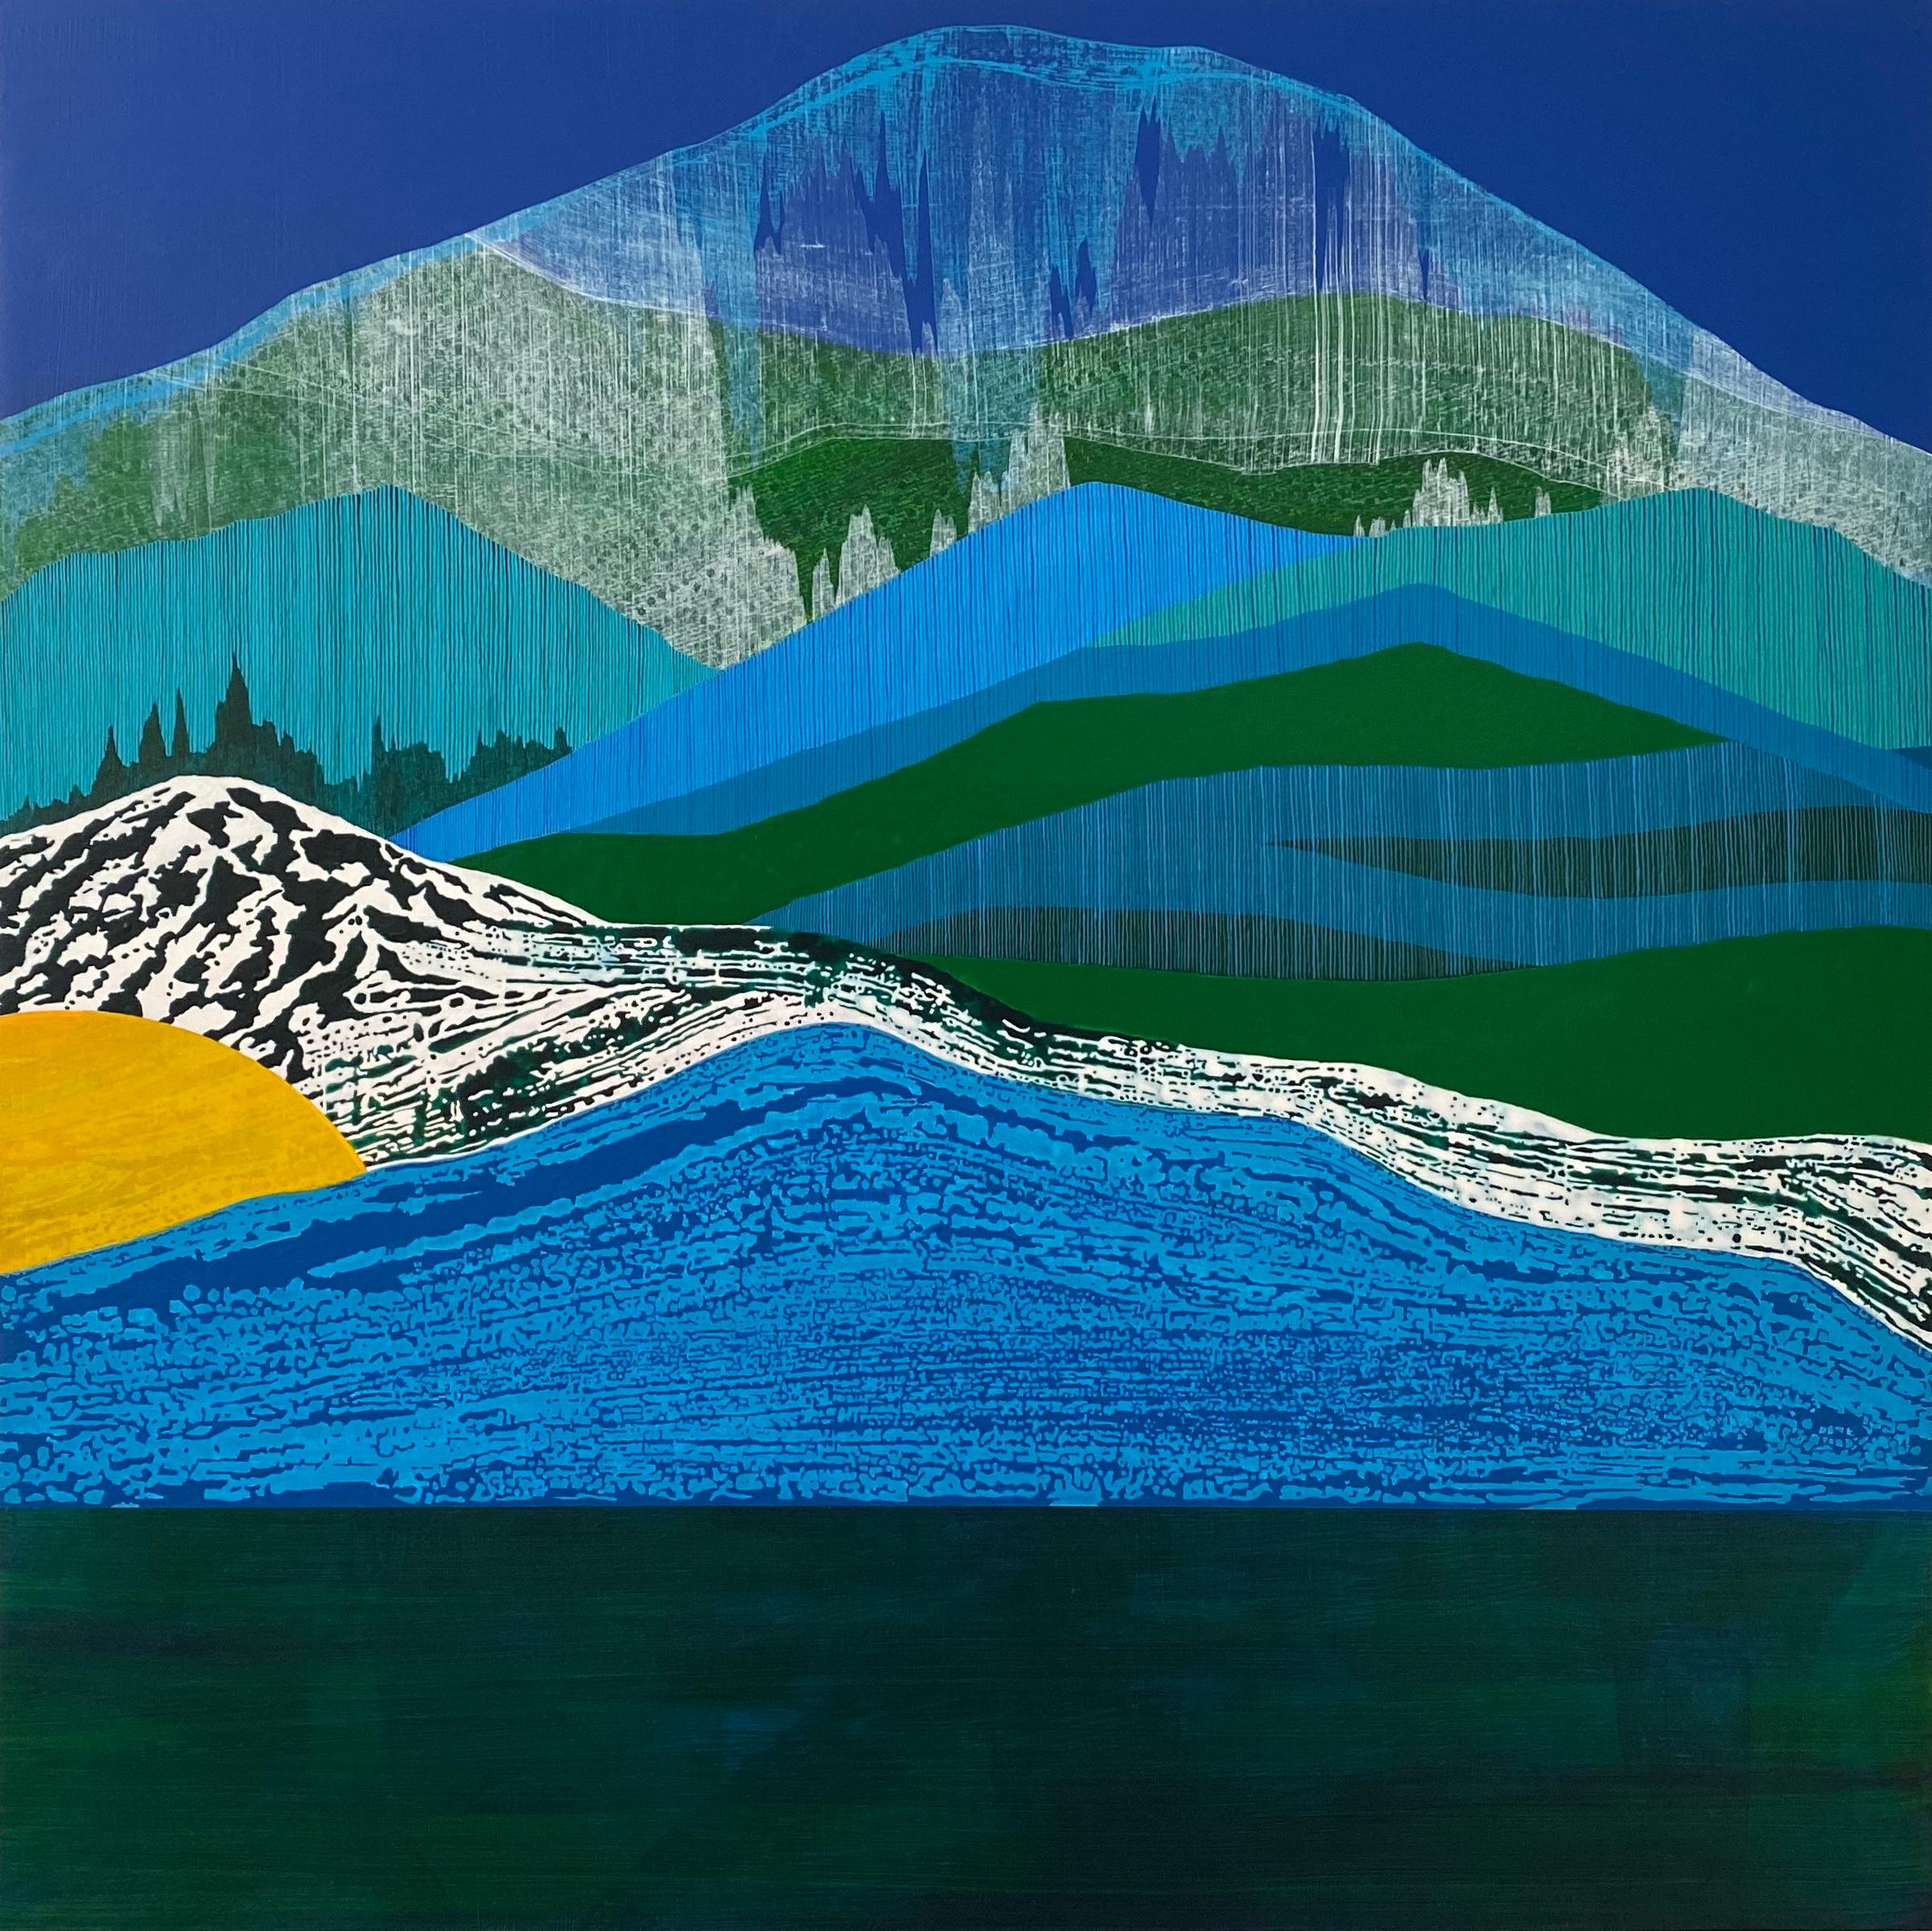 James Isherwood Landscape Painting - Tarn, blue and green mountain-scape on wood panel